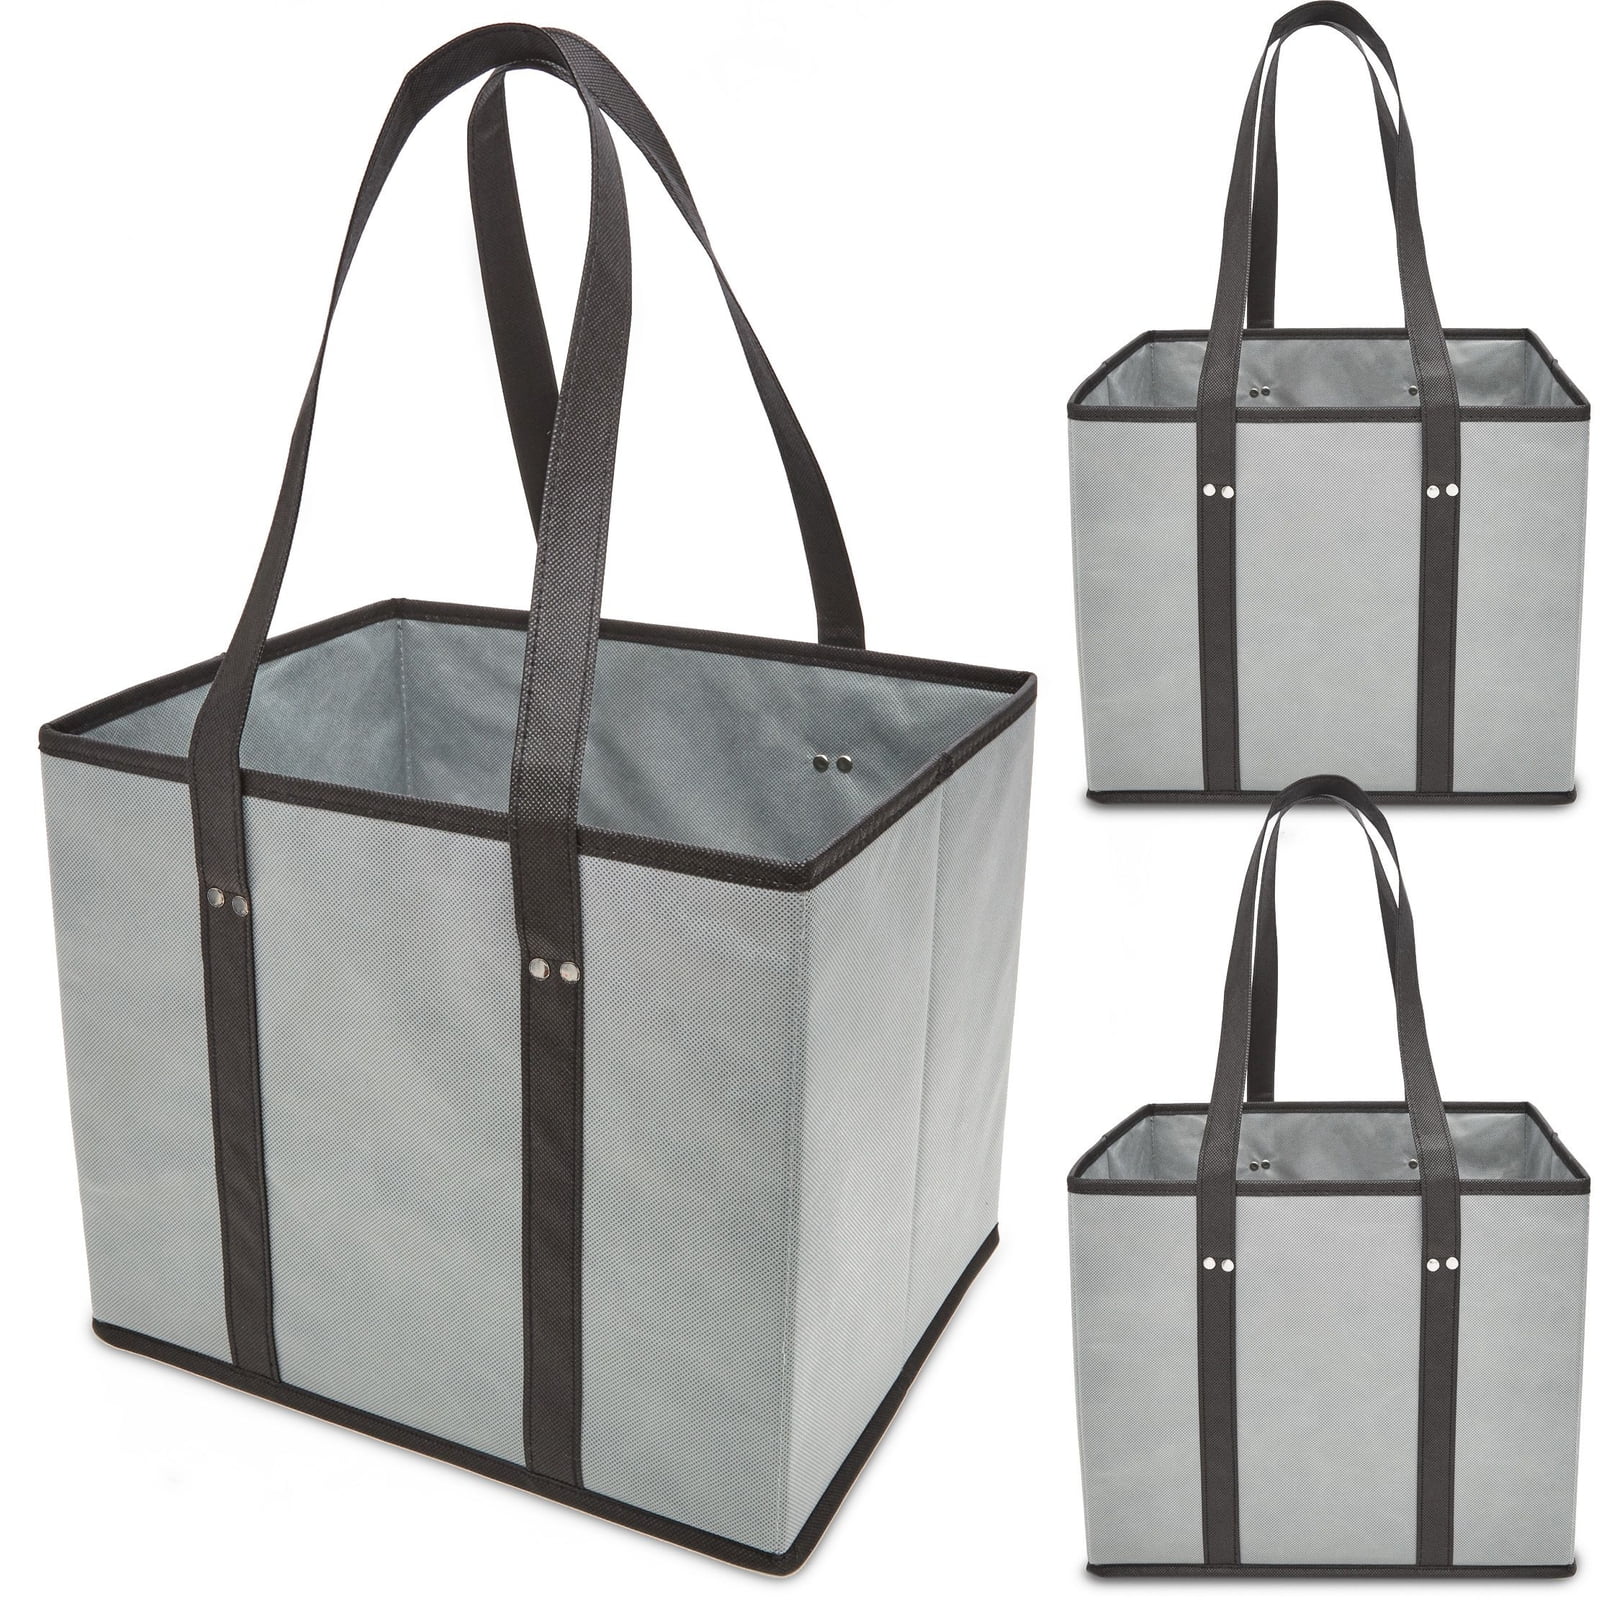 3 Pack Extra Large Reusable Heavy Duty Grocery Tote Shopping Bag with Pockets 